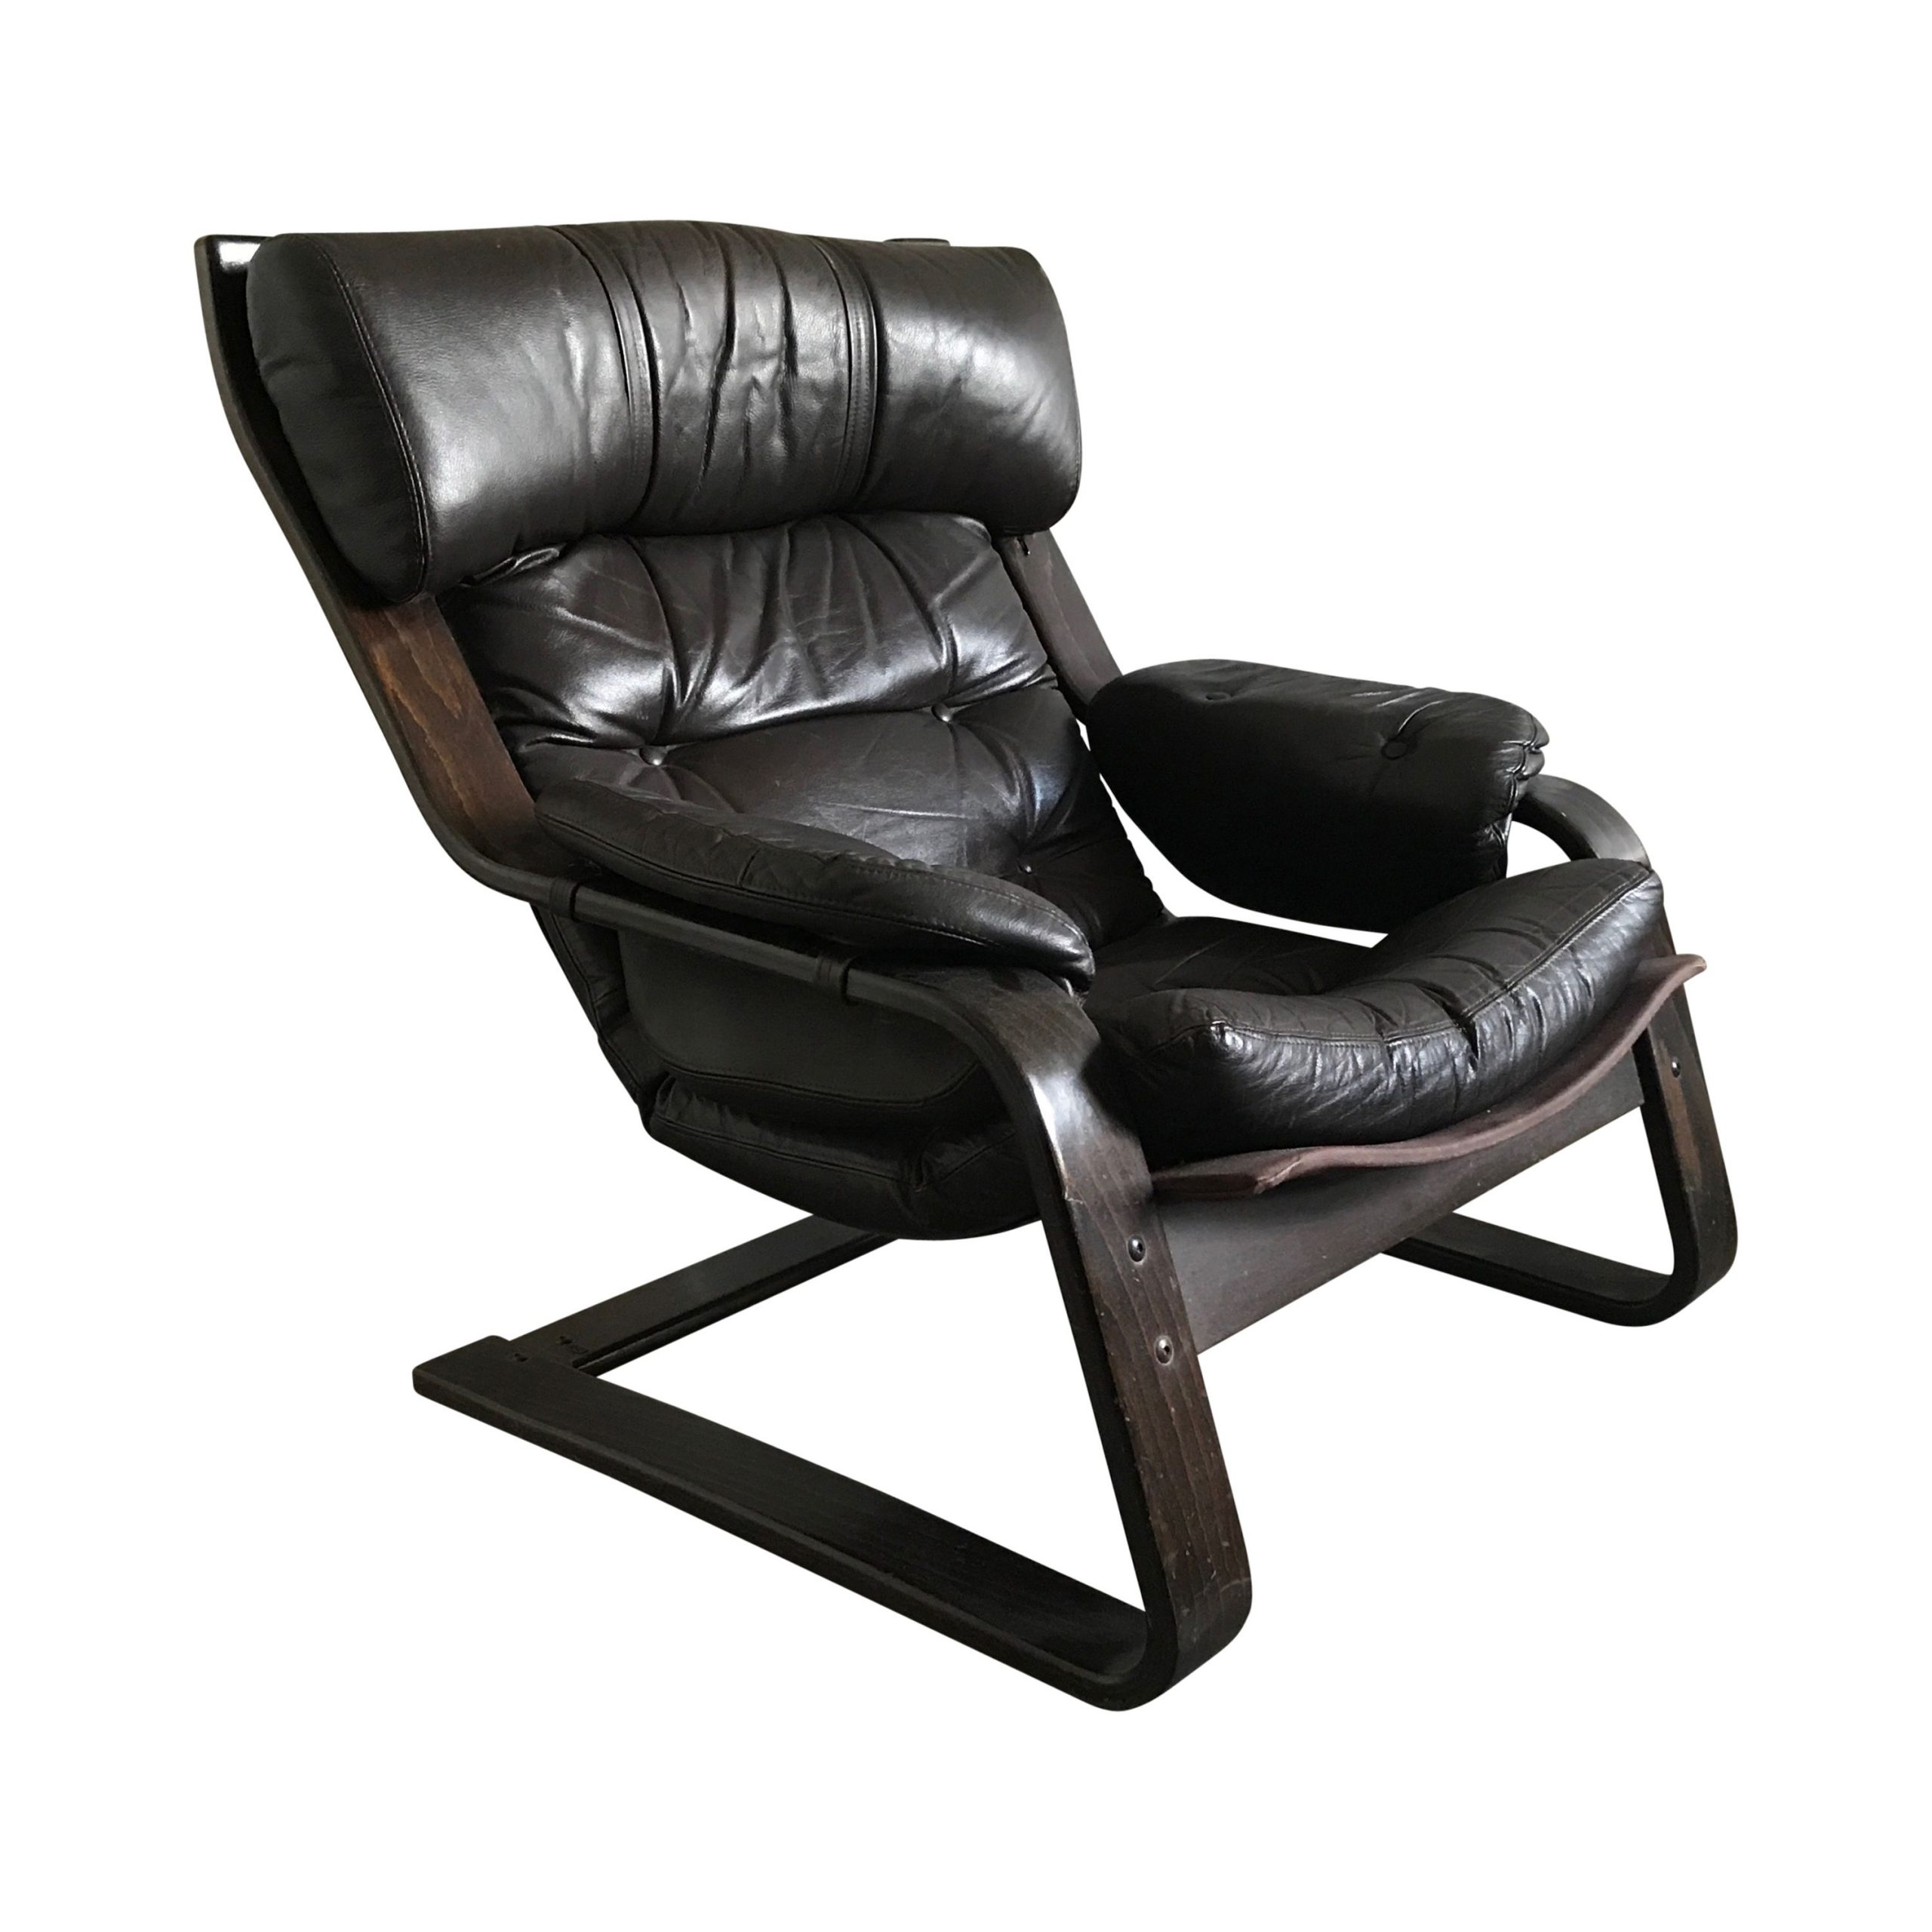 vintage-leather-and-wood-recliner-armchair-by-gote-mobel-sweden-1970s9-scaled-1.jpeg